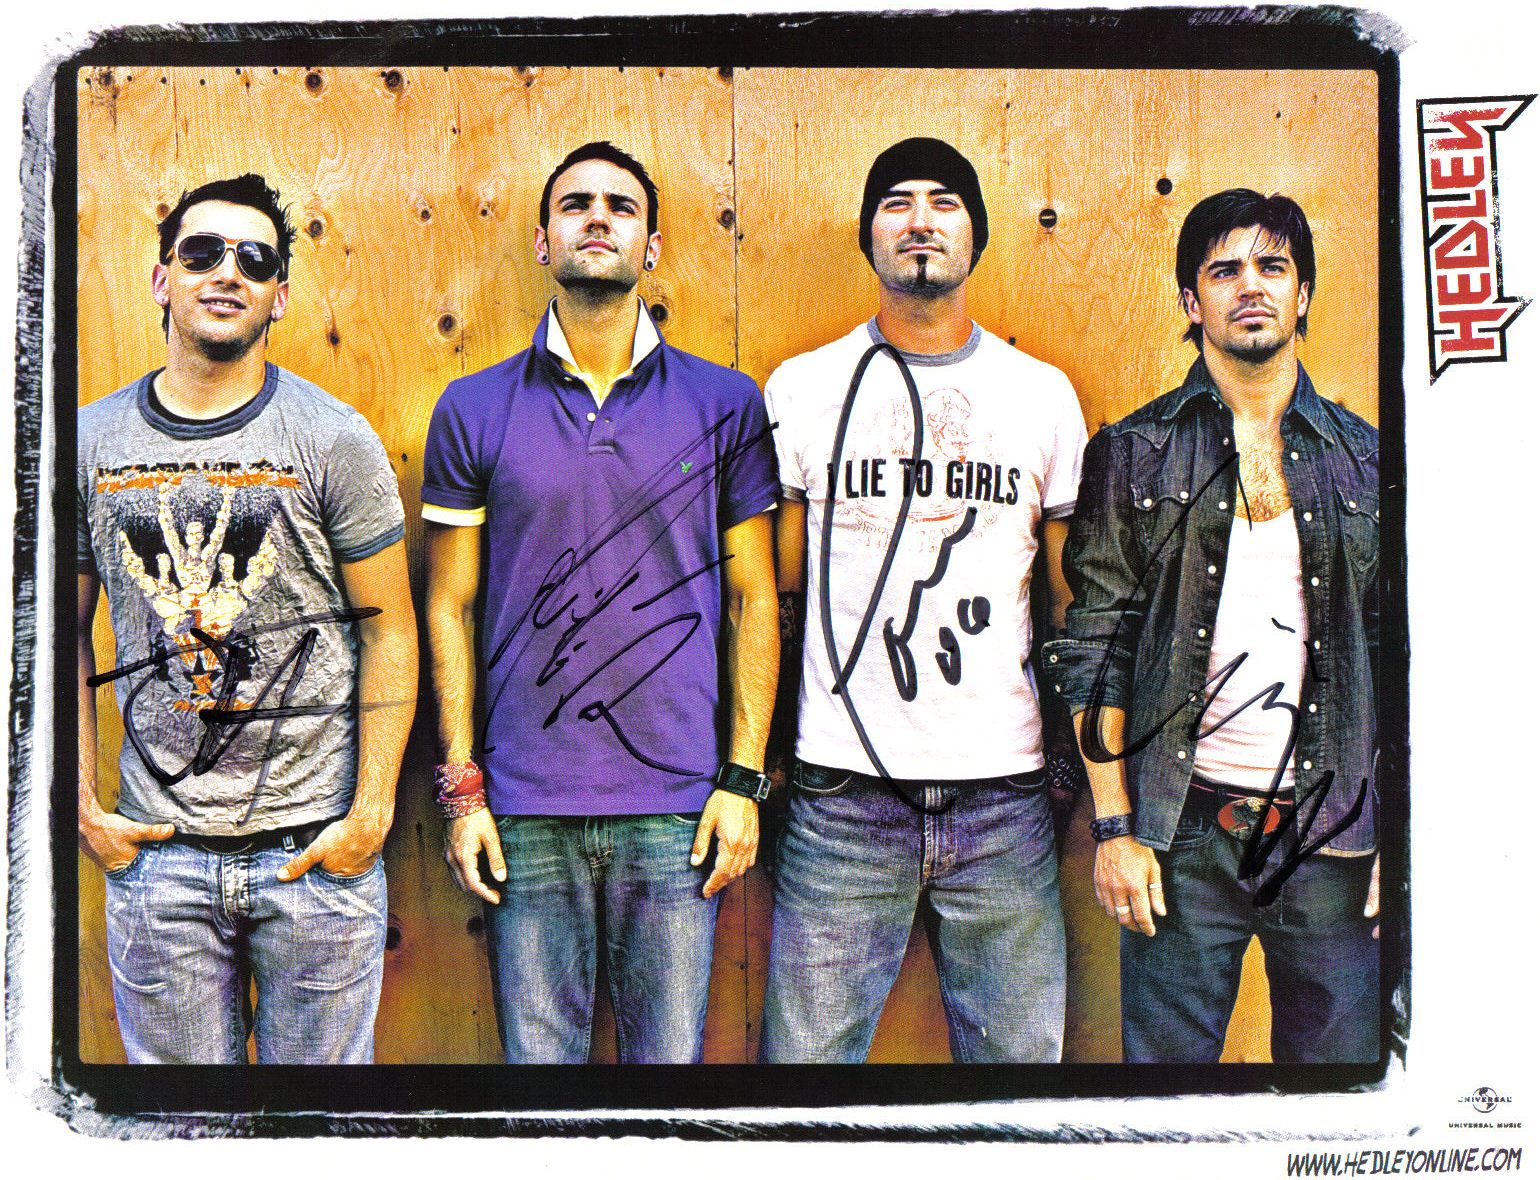 Download High quality Hedley wallpaper / Music / 1540x1180